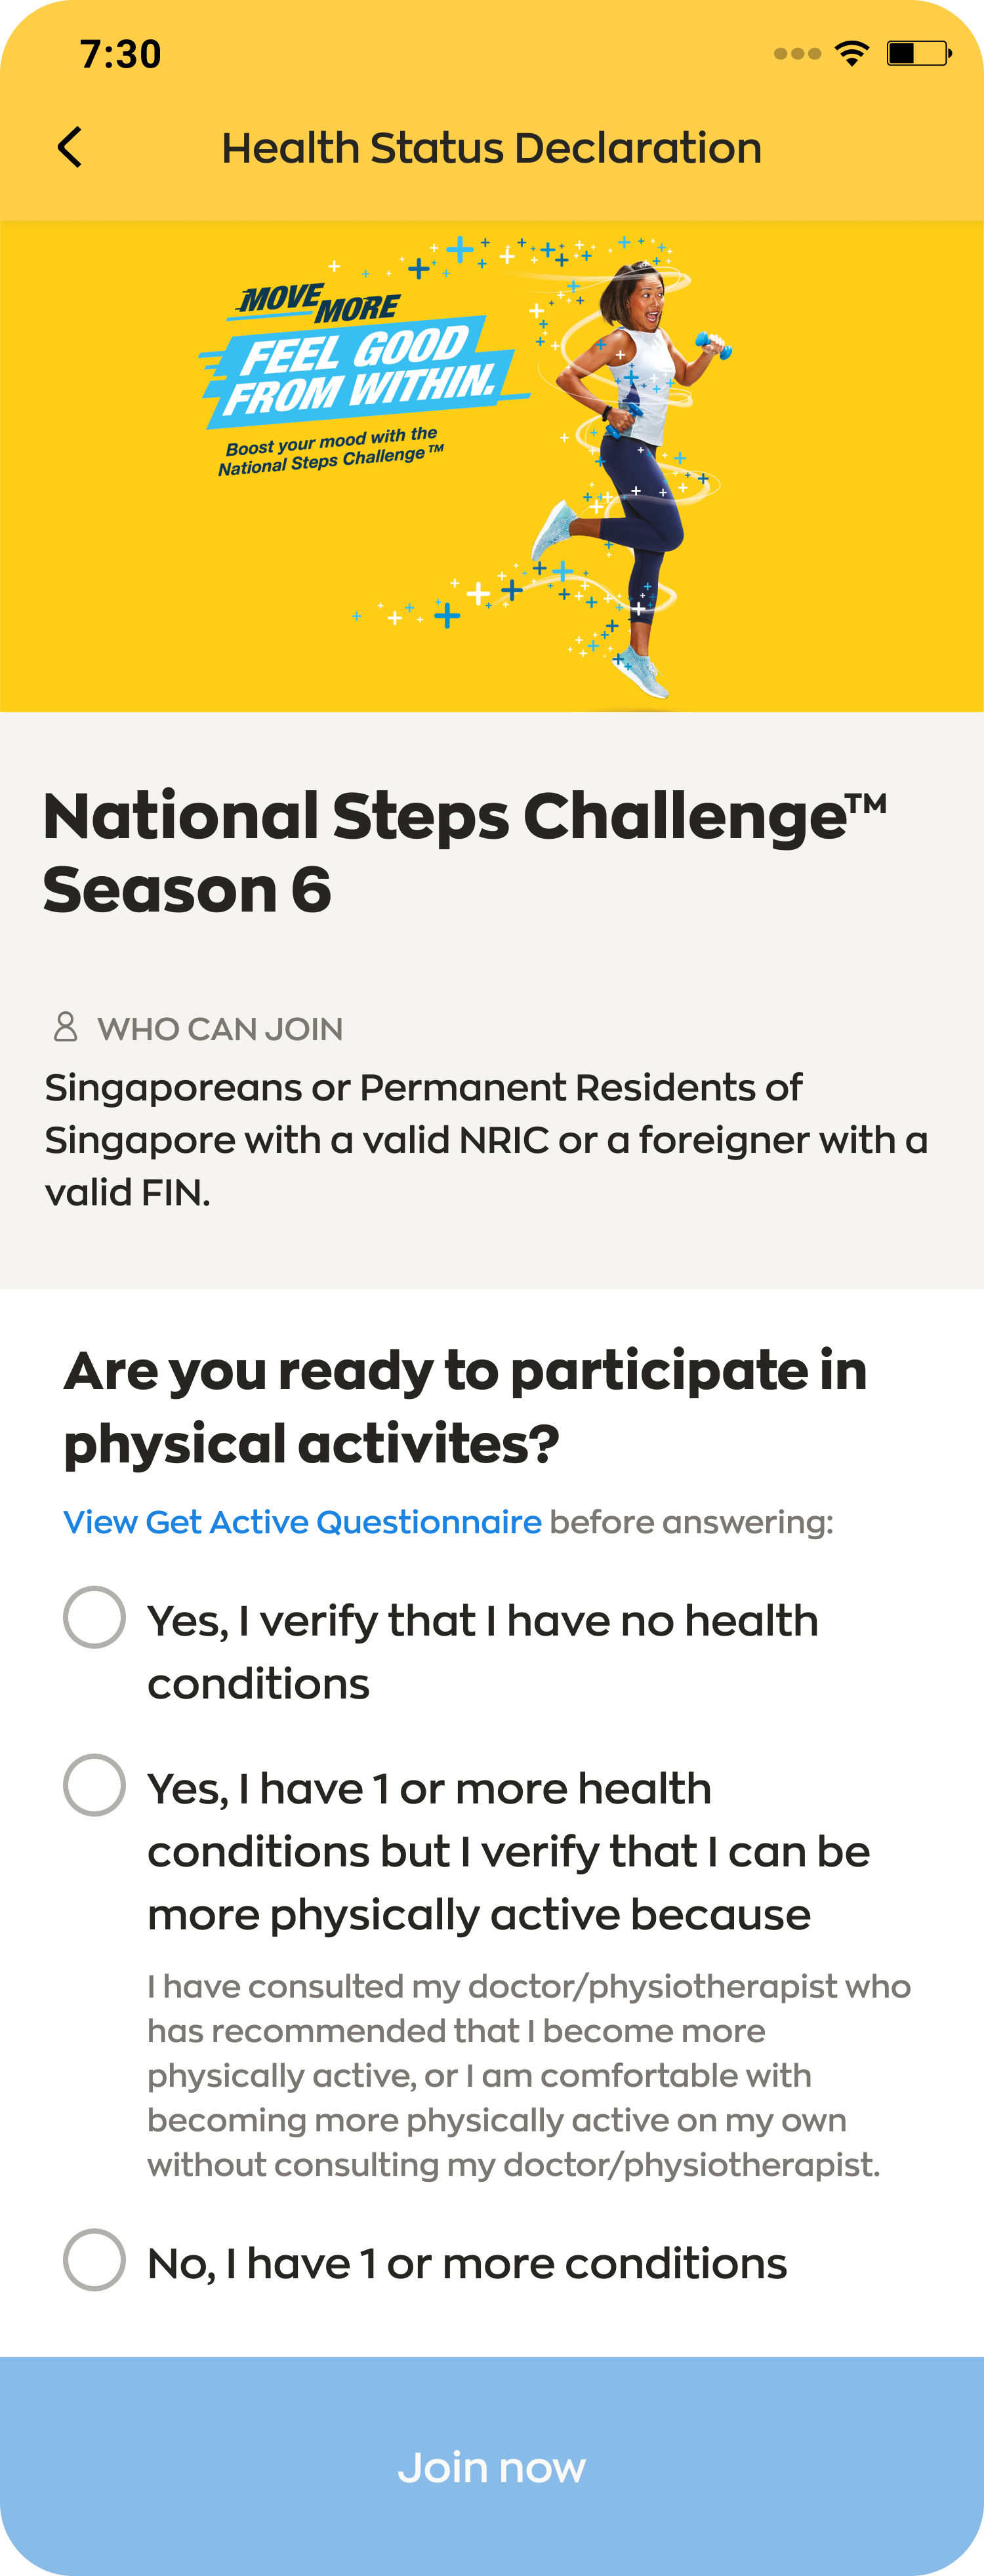 View Get Active Questionnaire and verify your health conditions. Click Join now to enter the challenge.